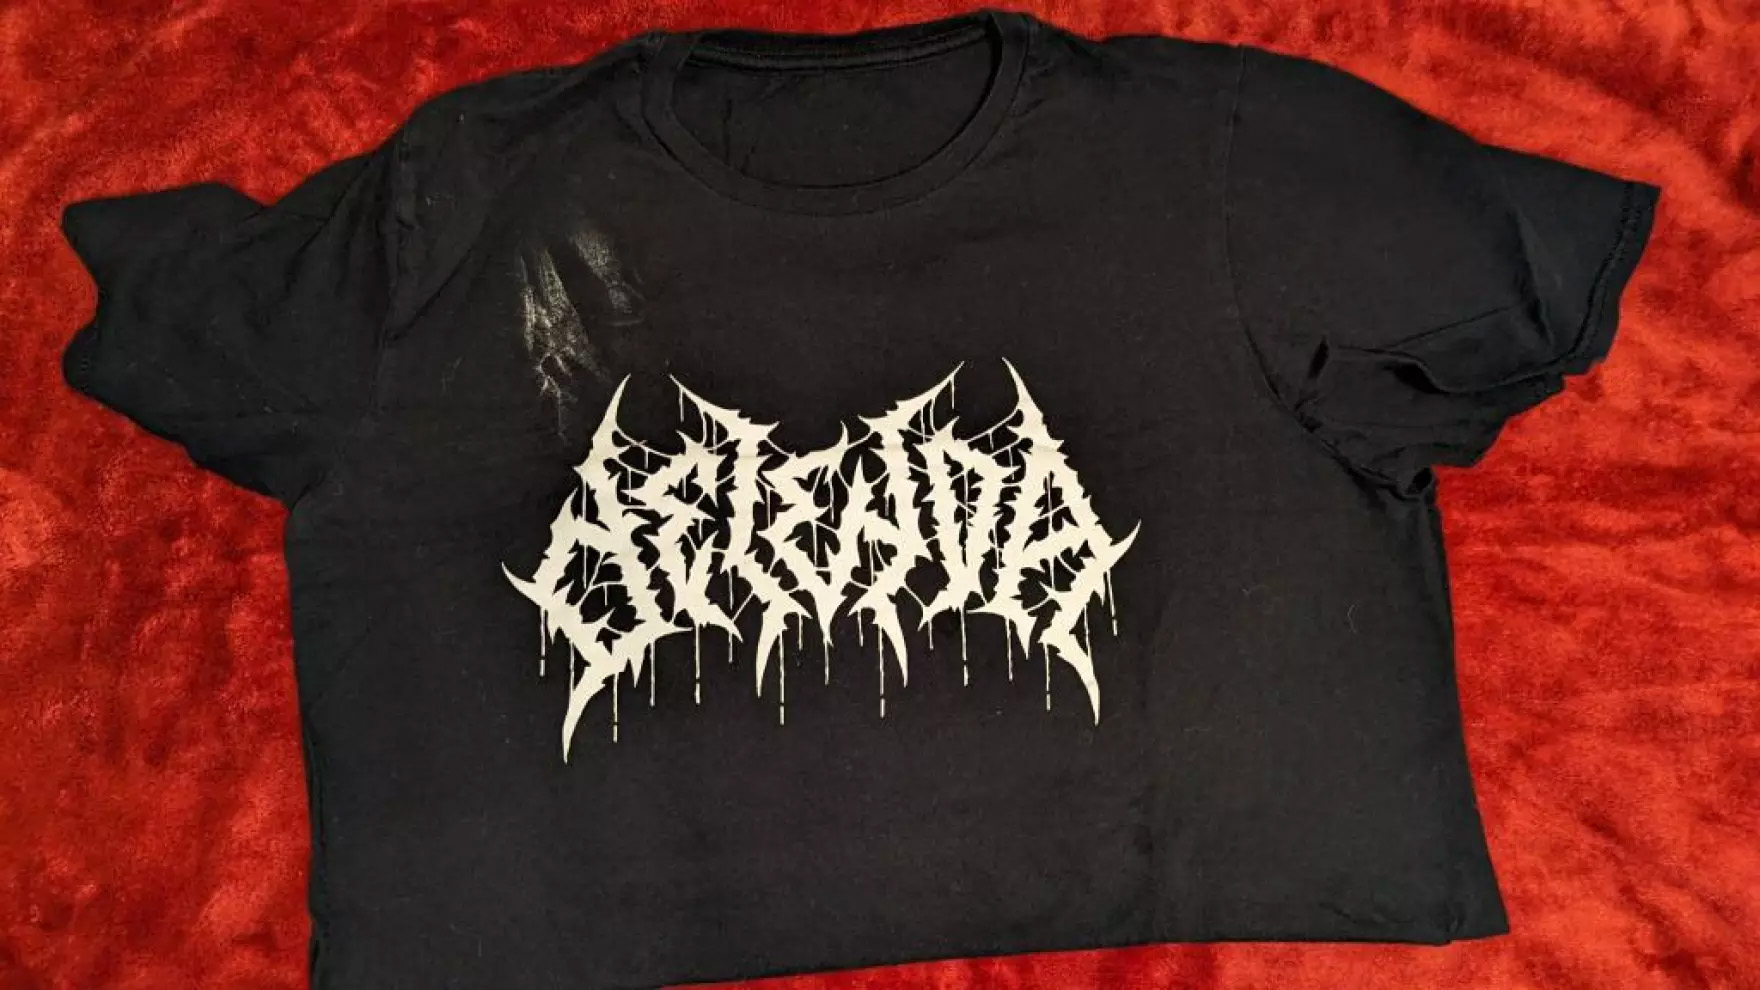 A black t-shirt with the name of the band Delenda written in a spiky black metal font is seen.